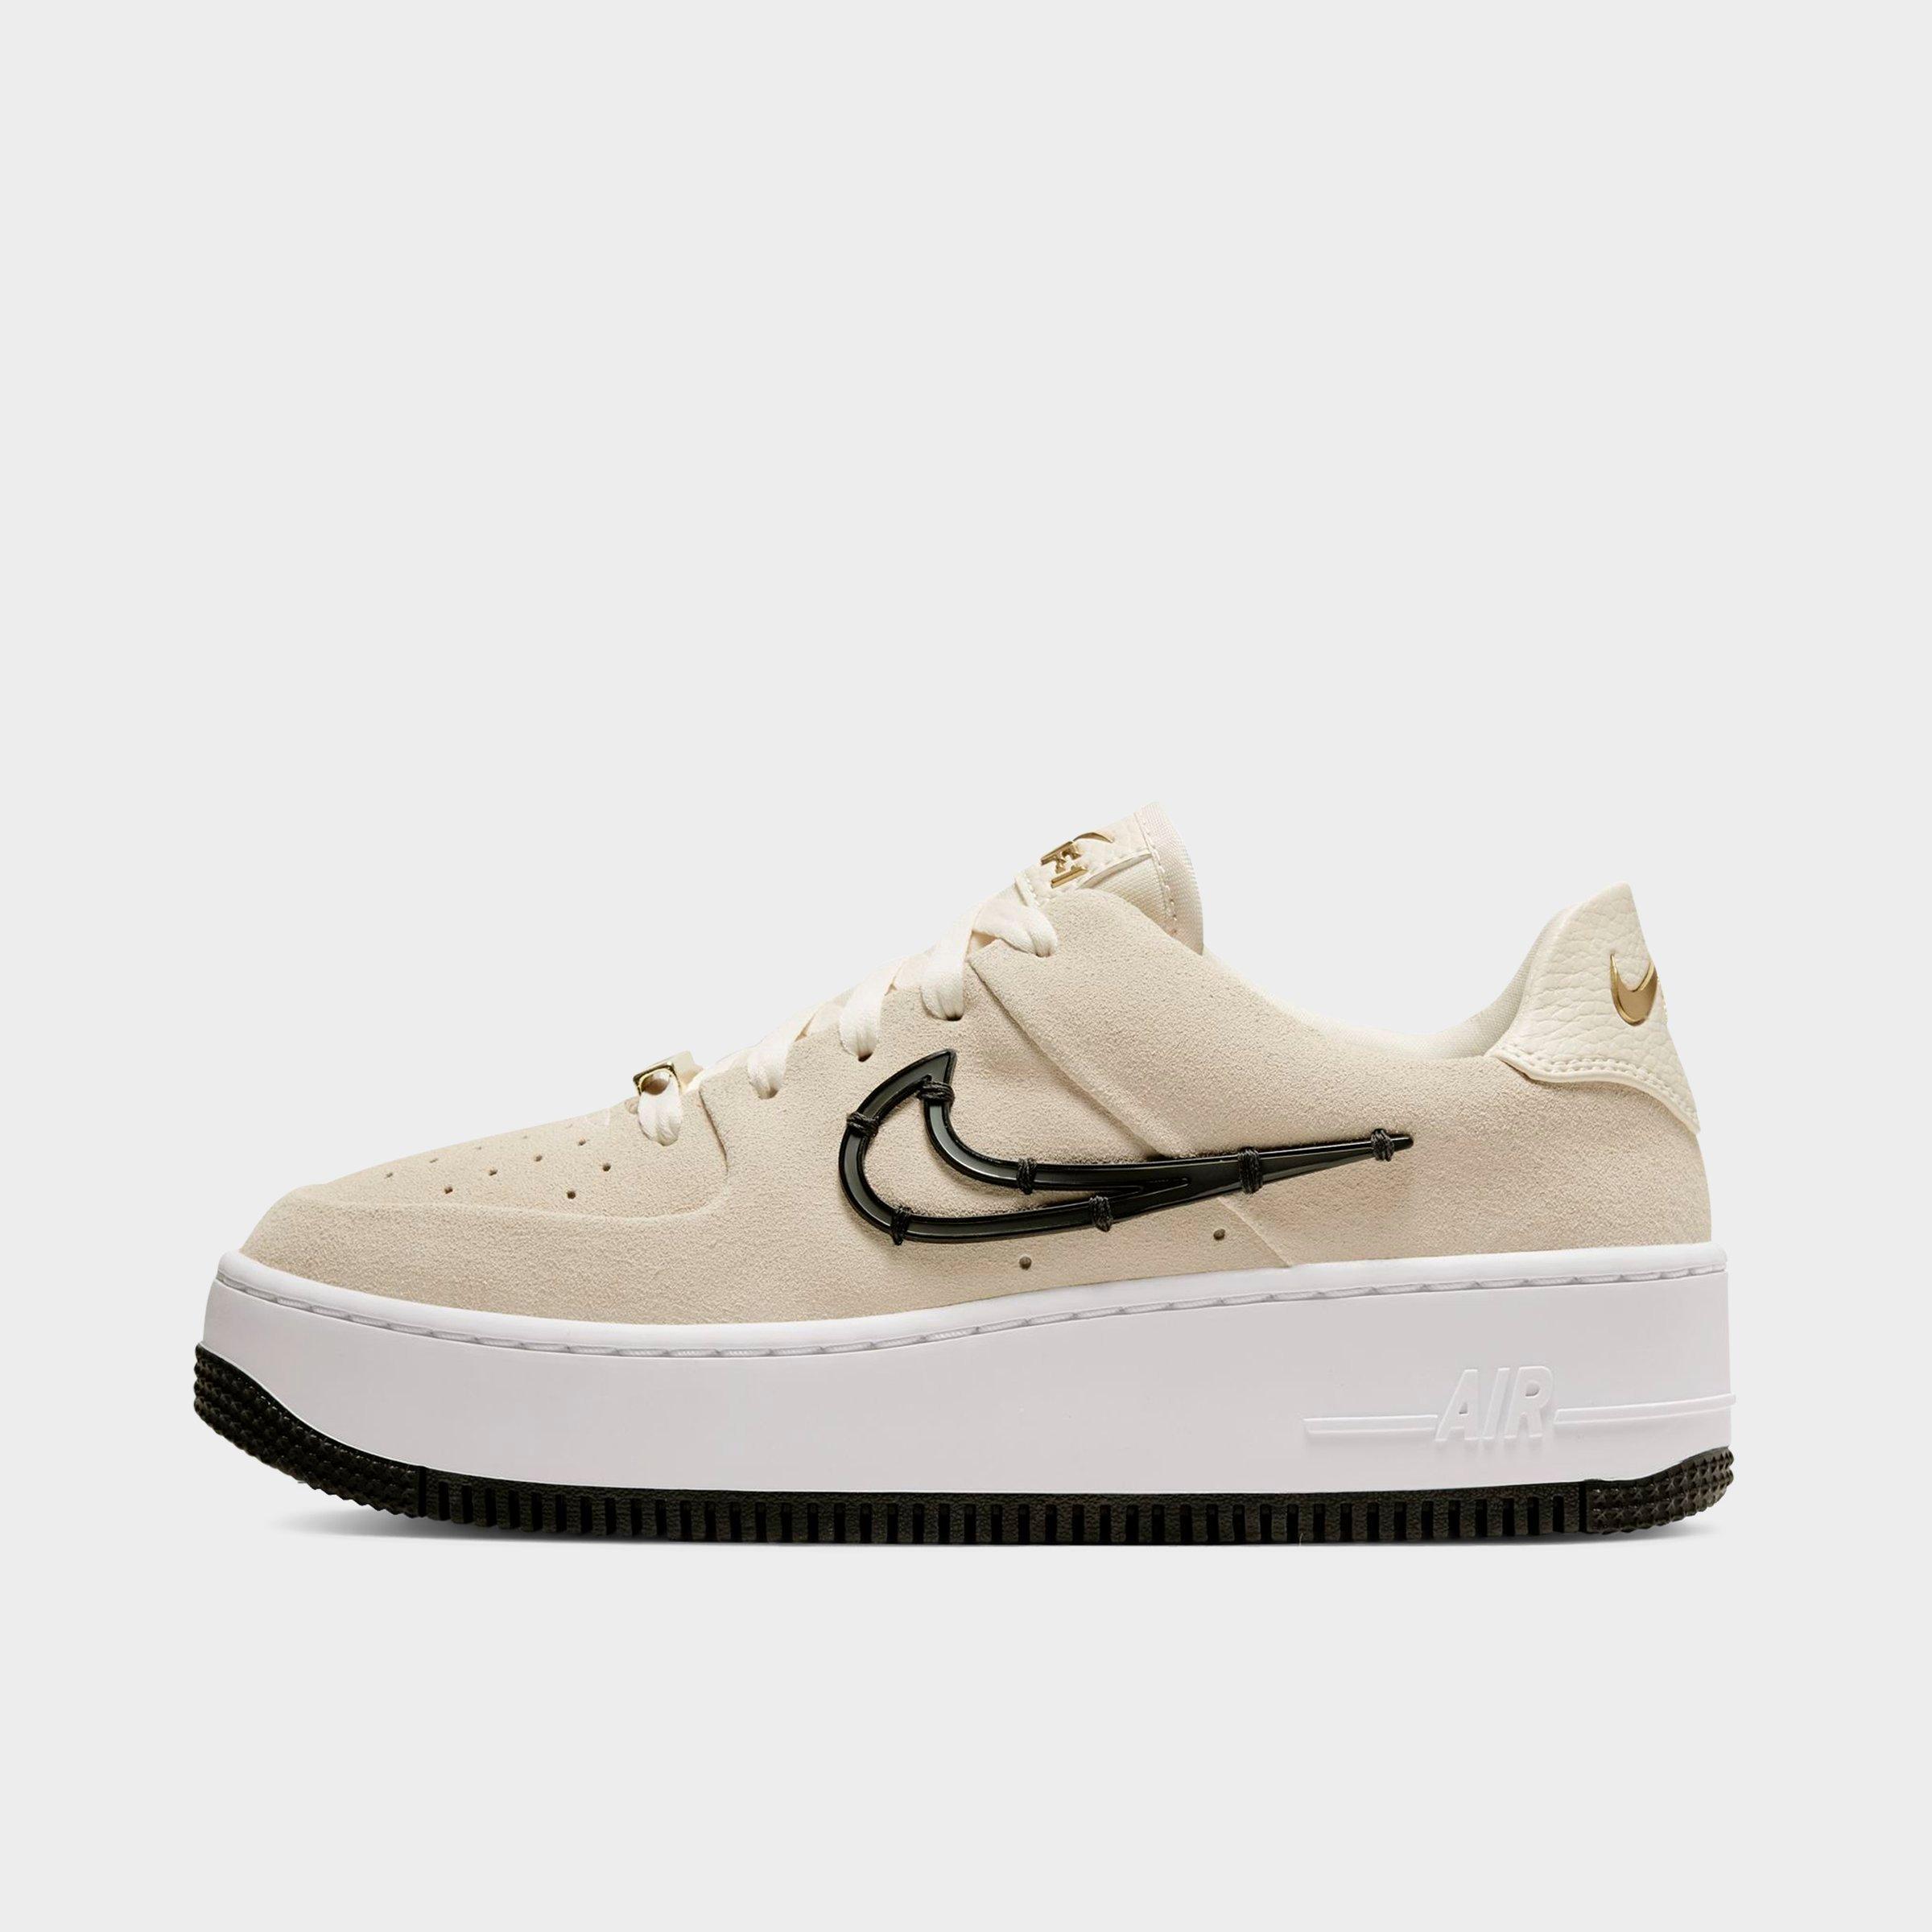 Women's Nike Air Force 1 Sage Low LX Casual Shoes| JD Sports